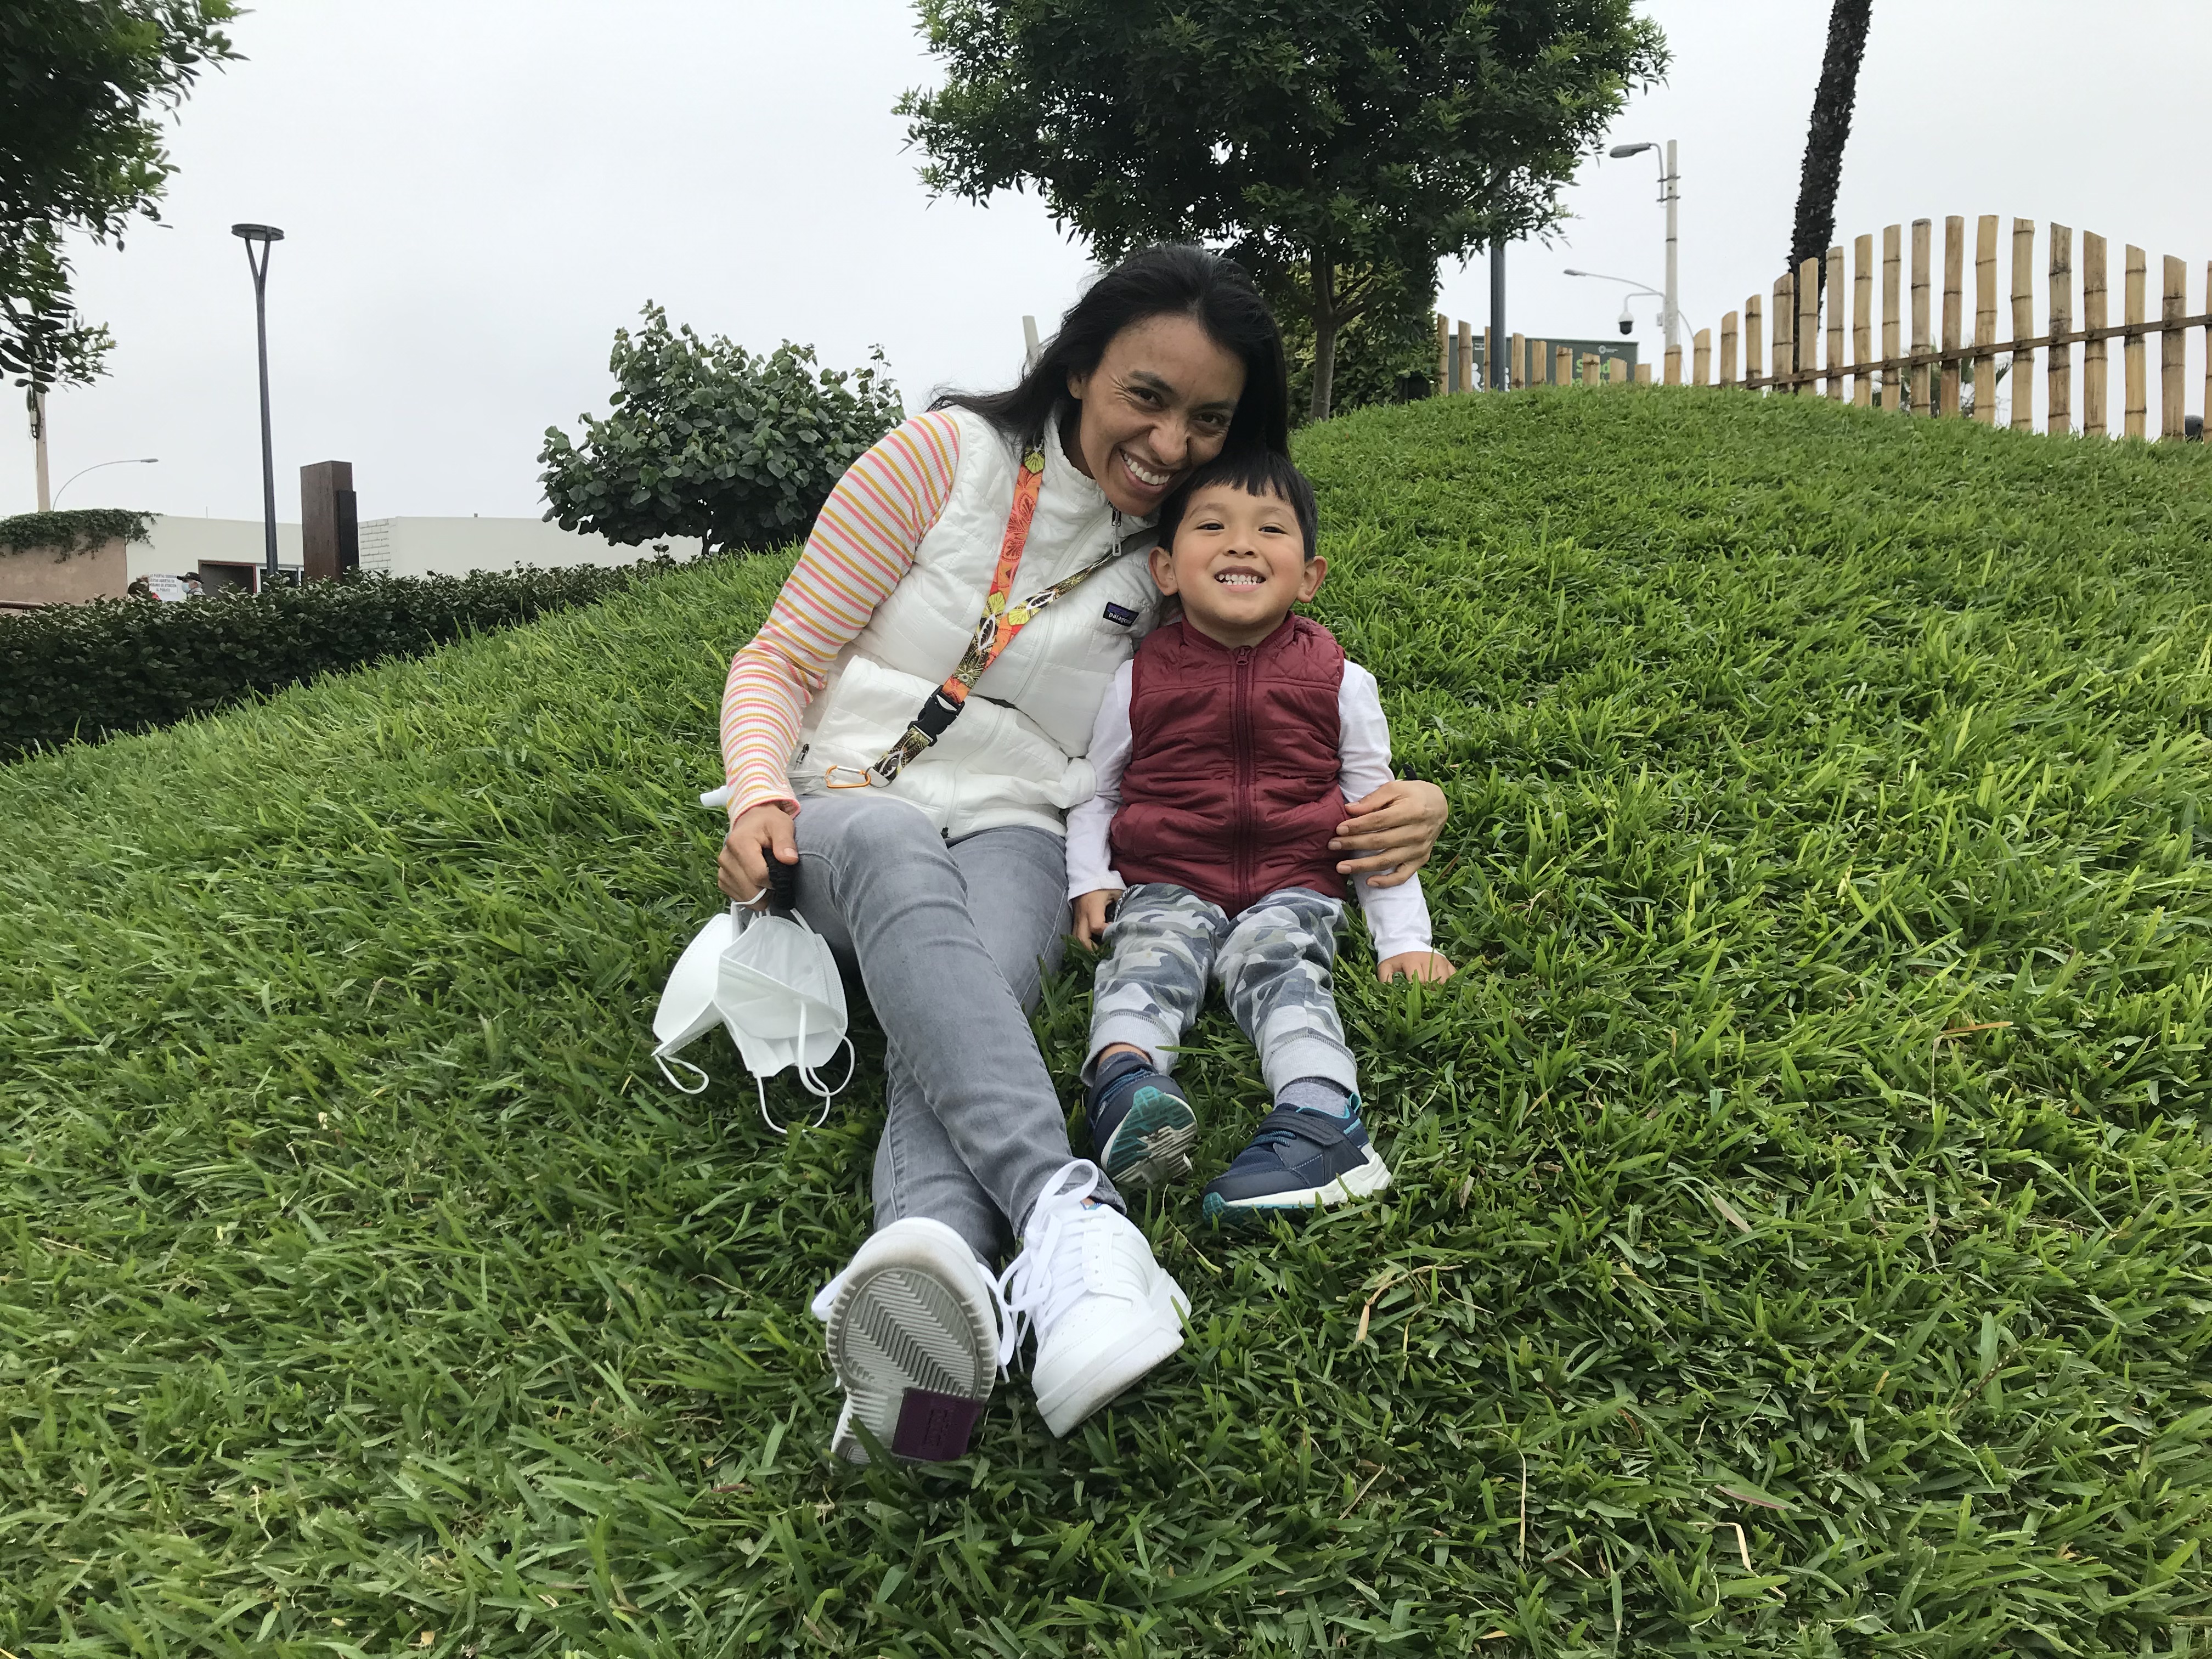 As parks and green spaces are opening up in Peru, Jenny and Thiago enjoy much needed fresh air!